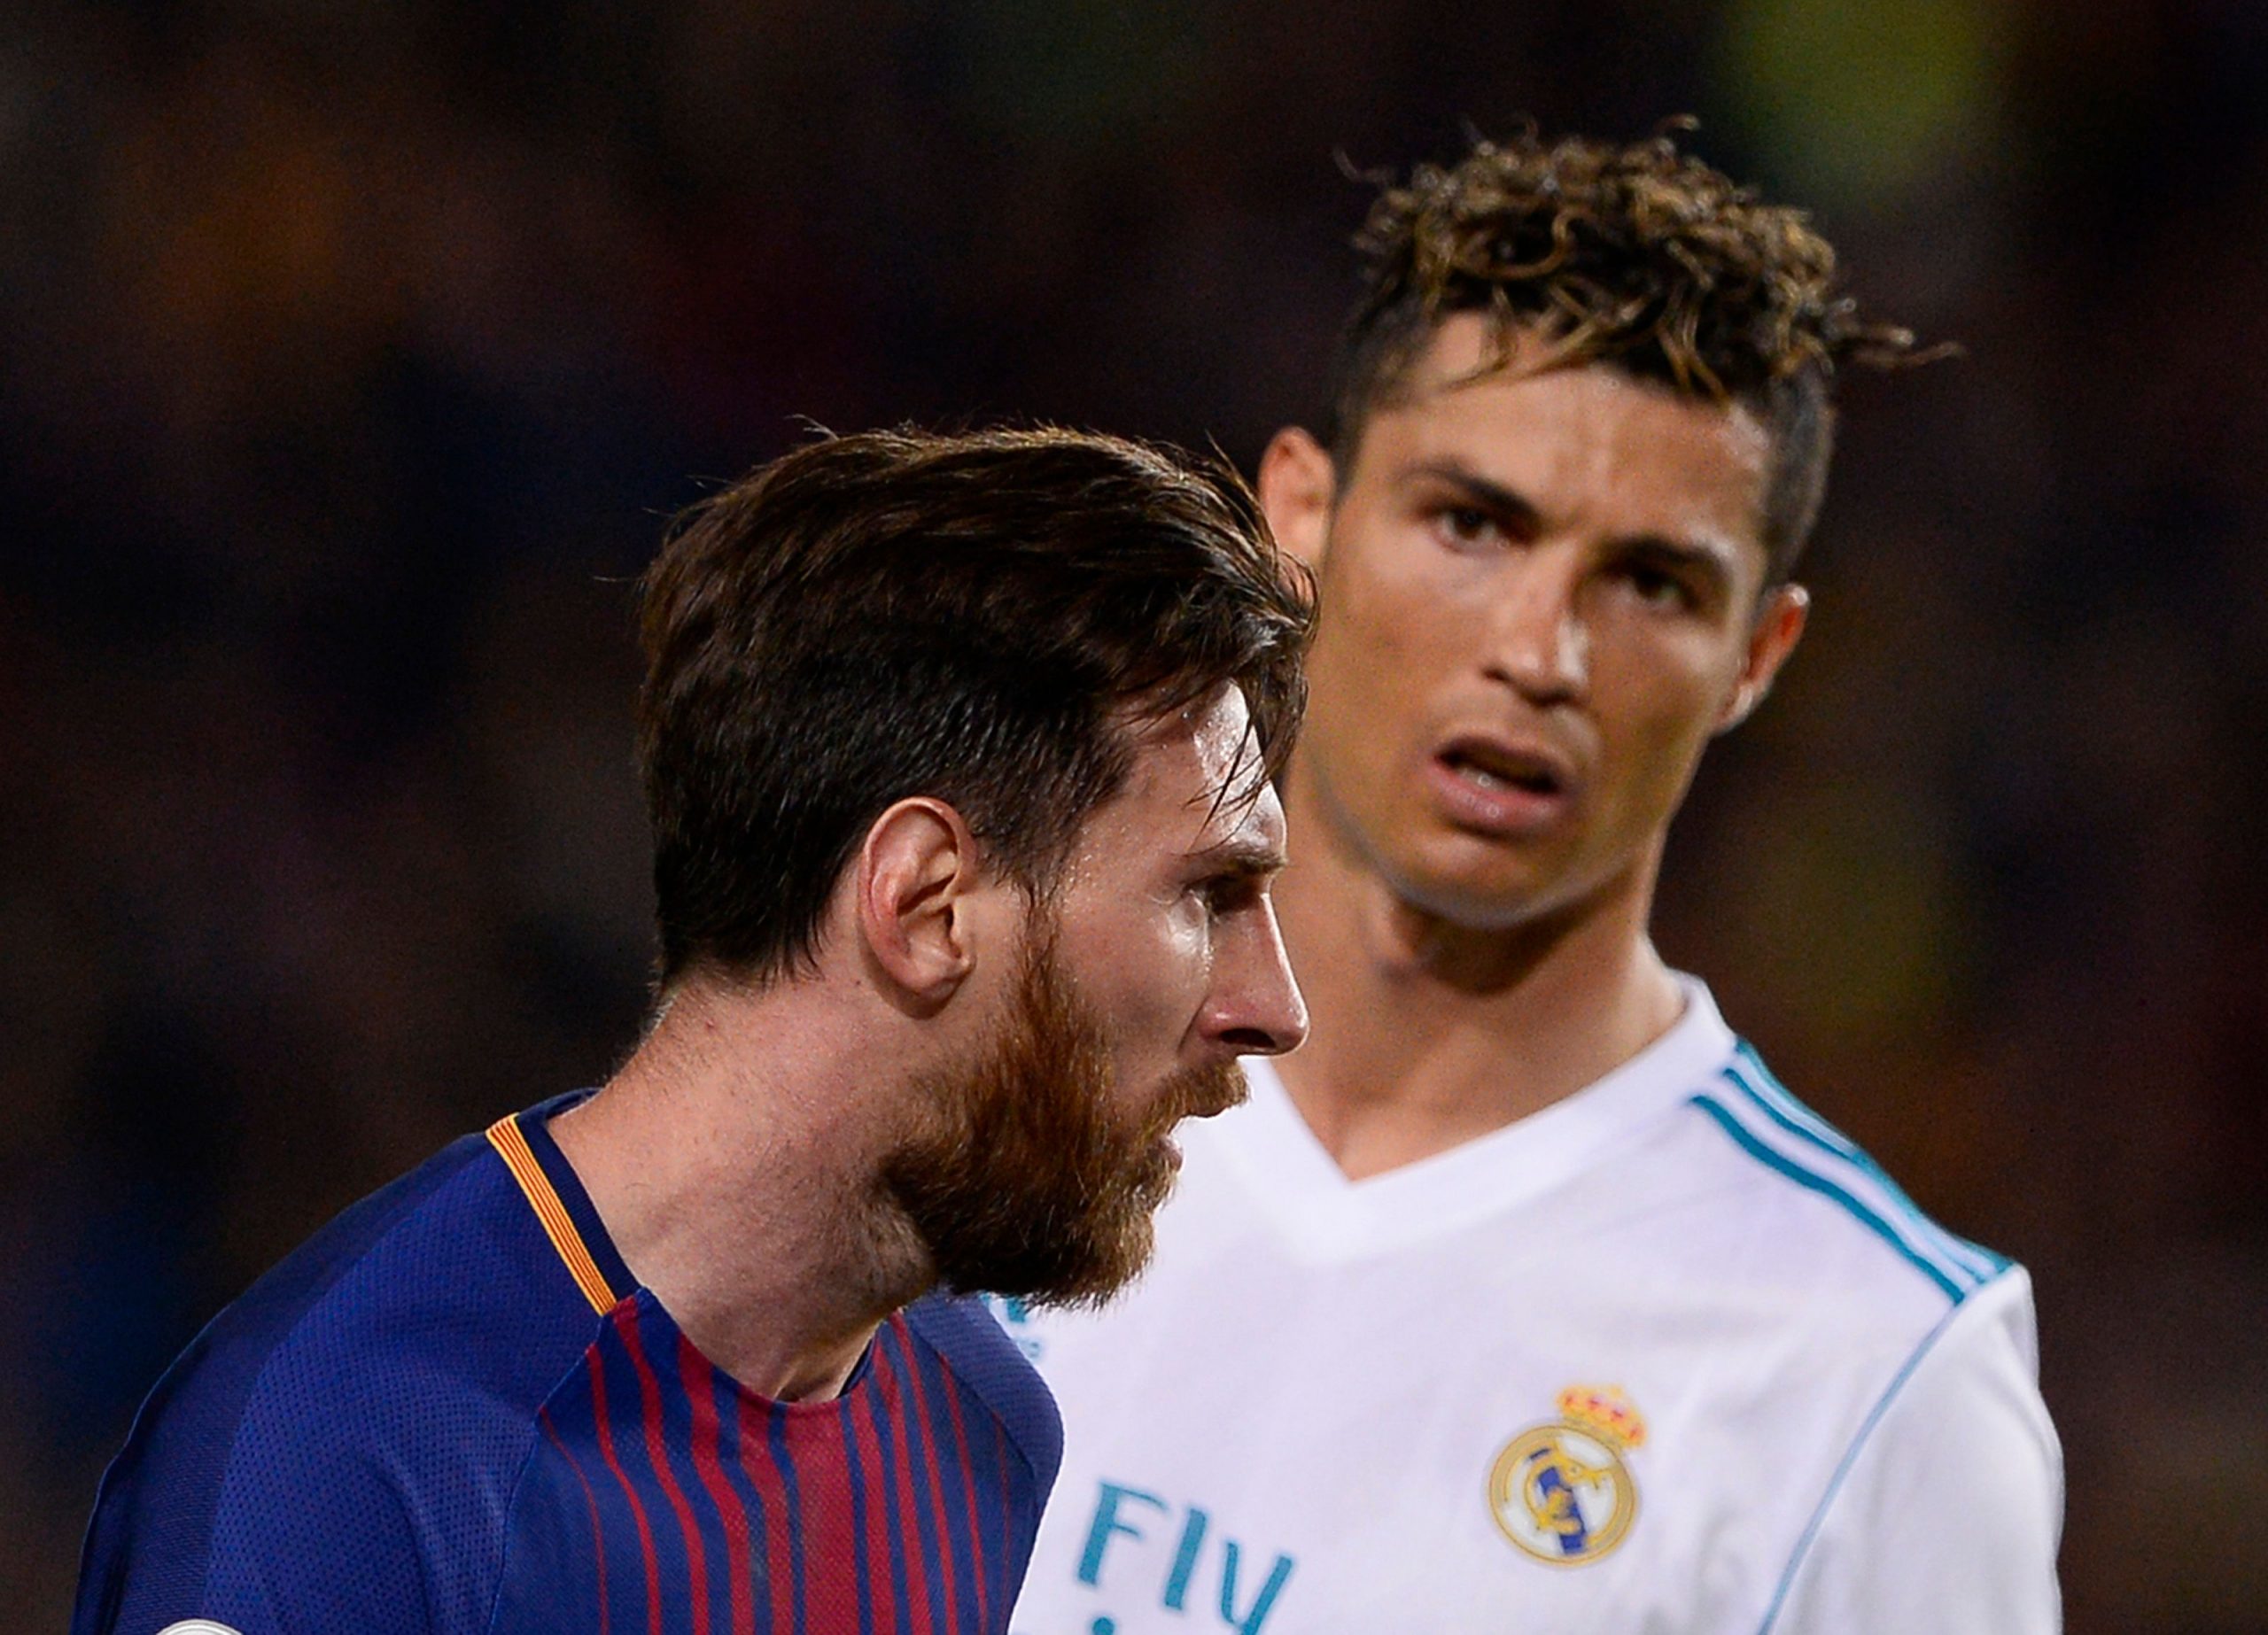 Cristiano Ronaldo vs Lionel Messi: Who is the highest paid footballer?